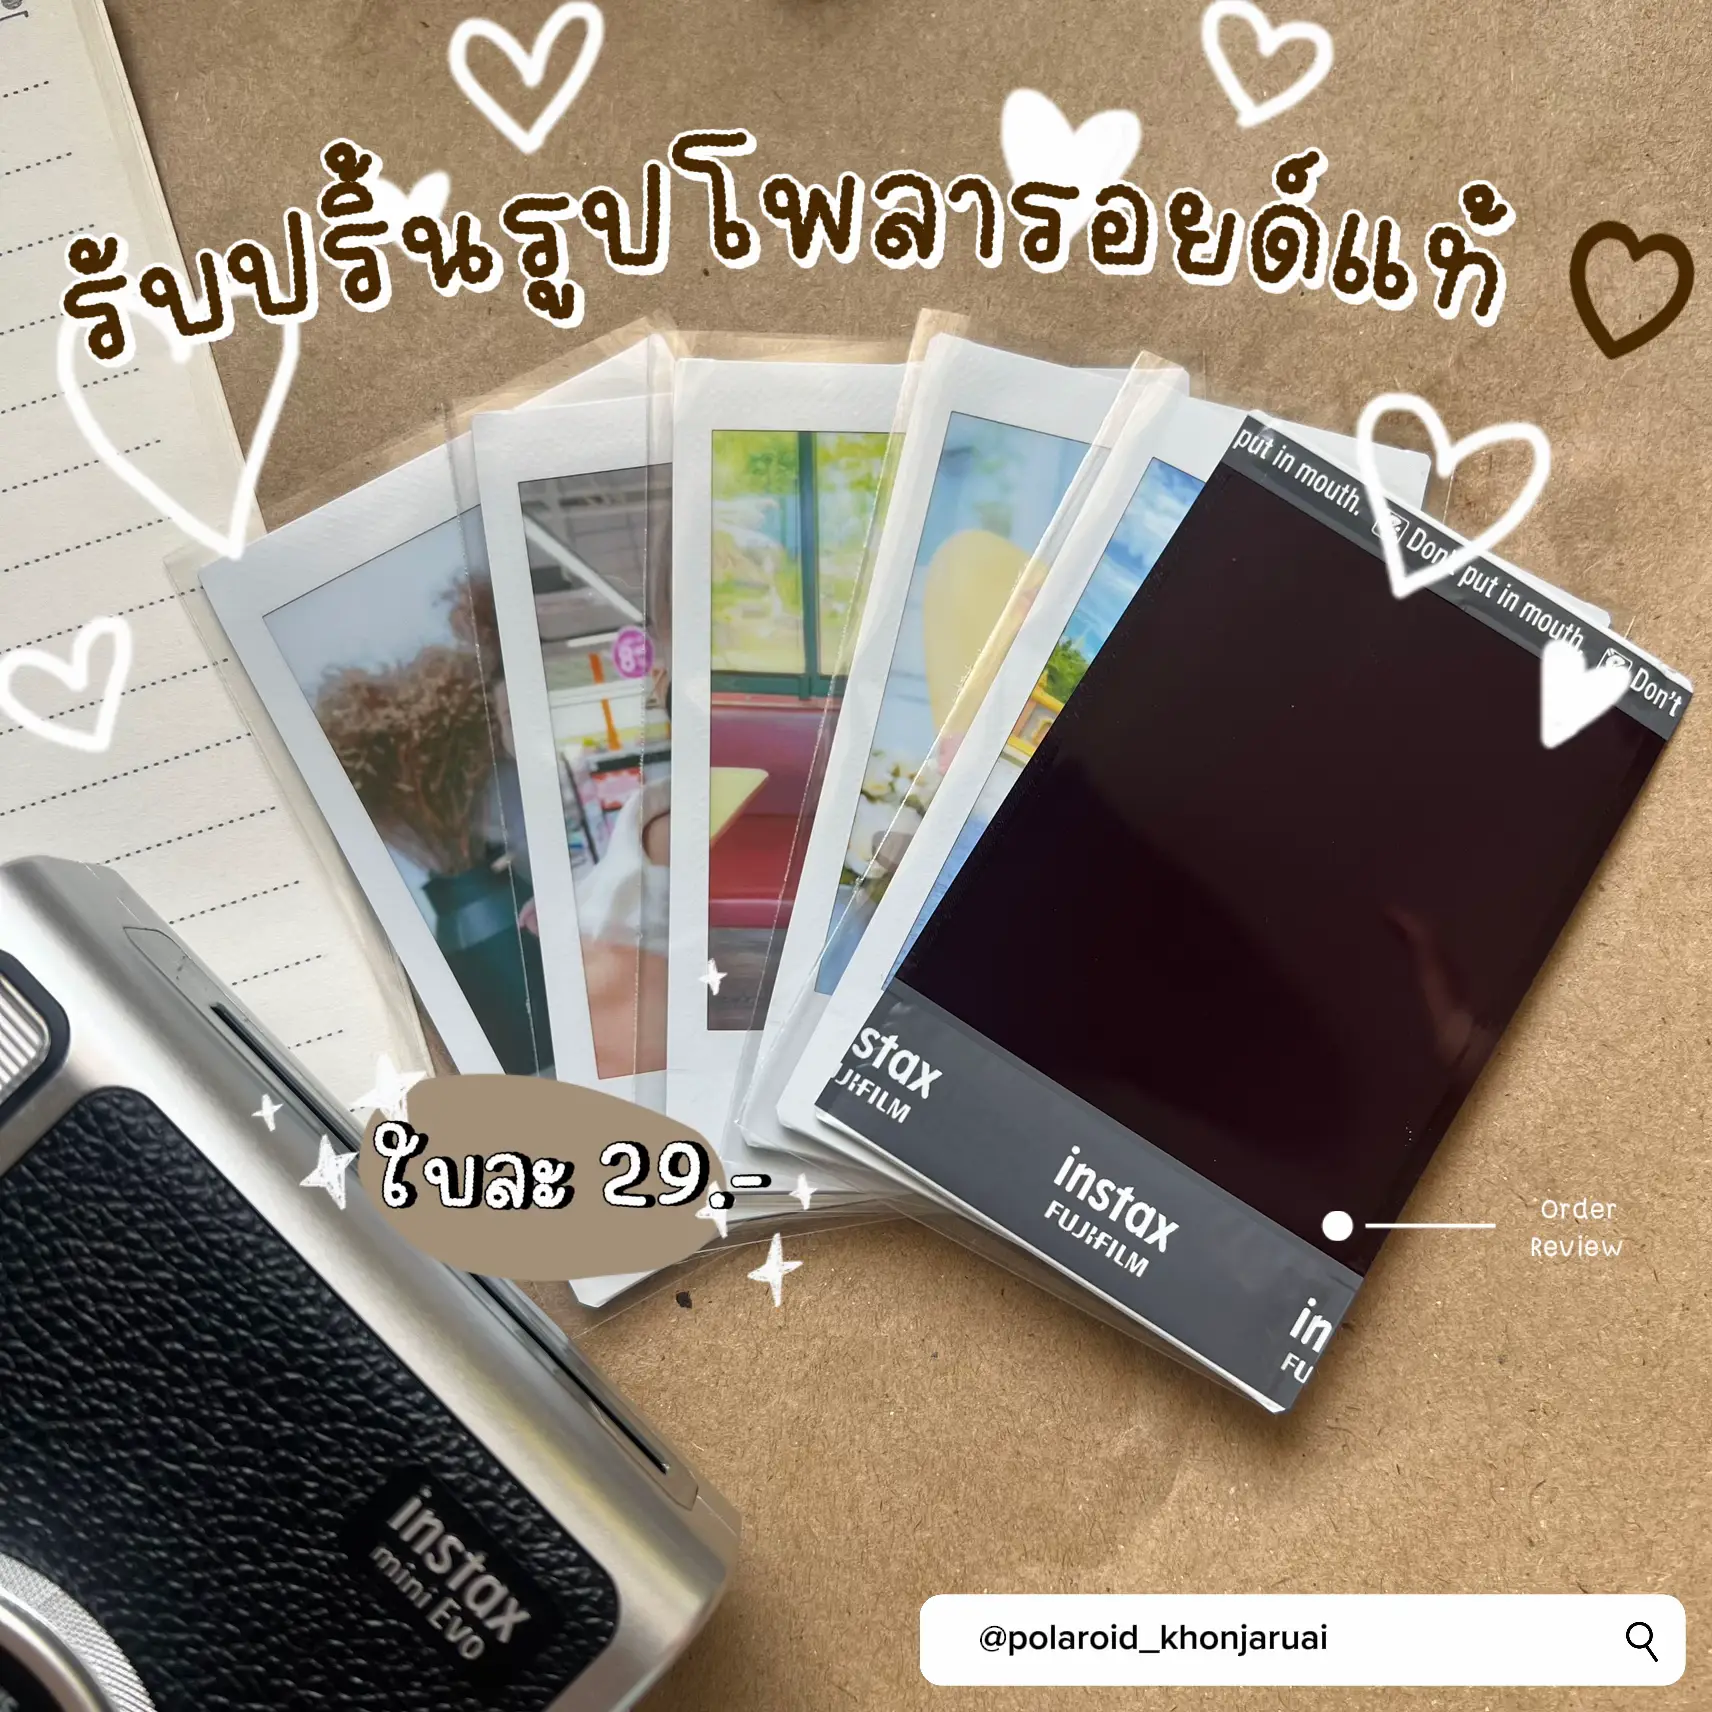 Get a 29 baht Polaroid print. Very cheap. ‼️, Gallery posted by daladeww